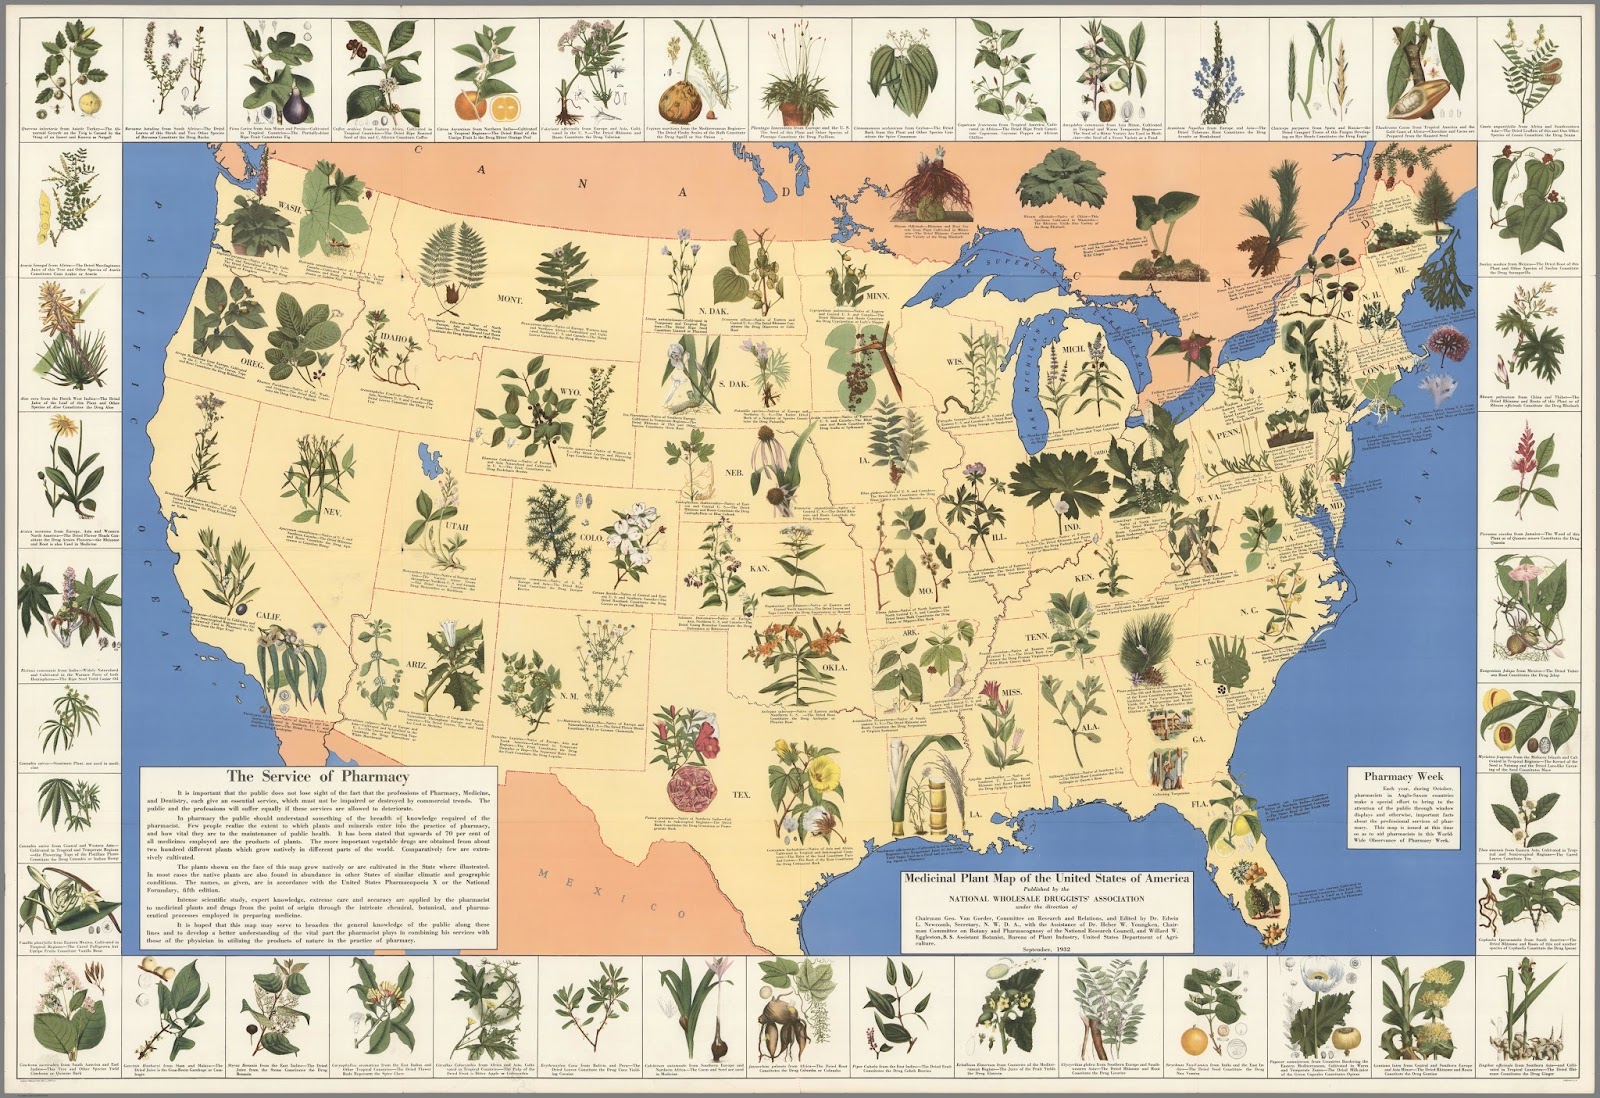 Fascinating 1930’s Pharmacist Map of Herbal Cures Released To Public